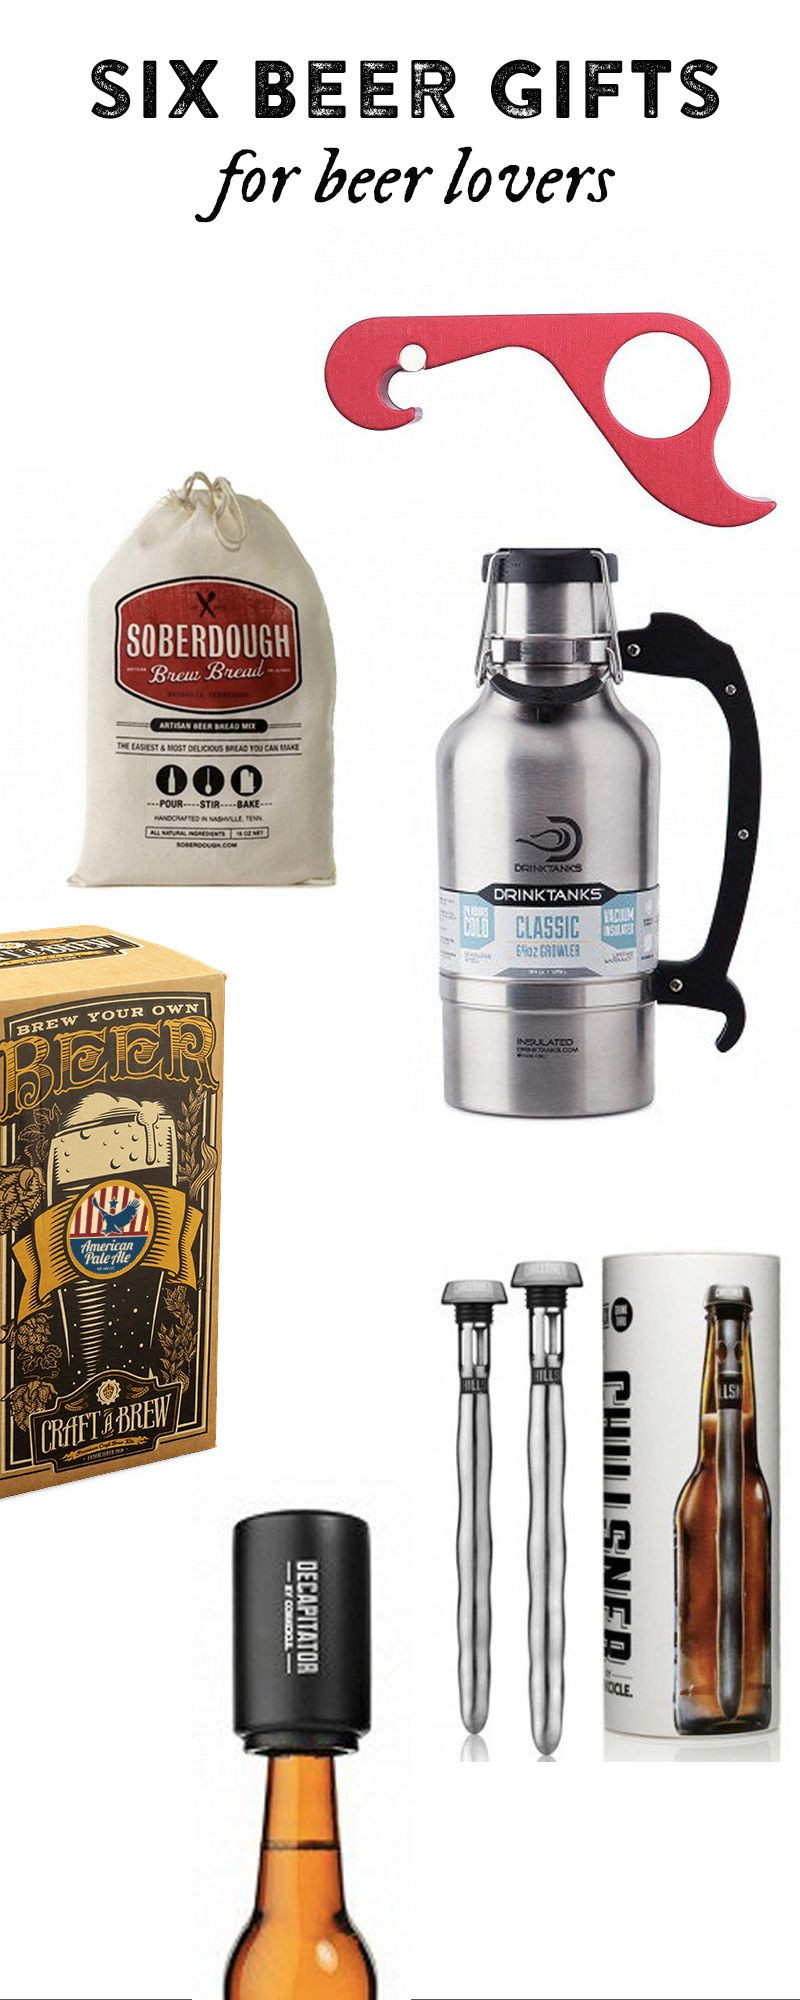 Gift Ideas For Craft Beer Lovers
 Top 10 Beer Lover Gifts For the Craft Brew Enthusiast Who